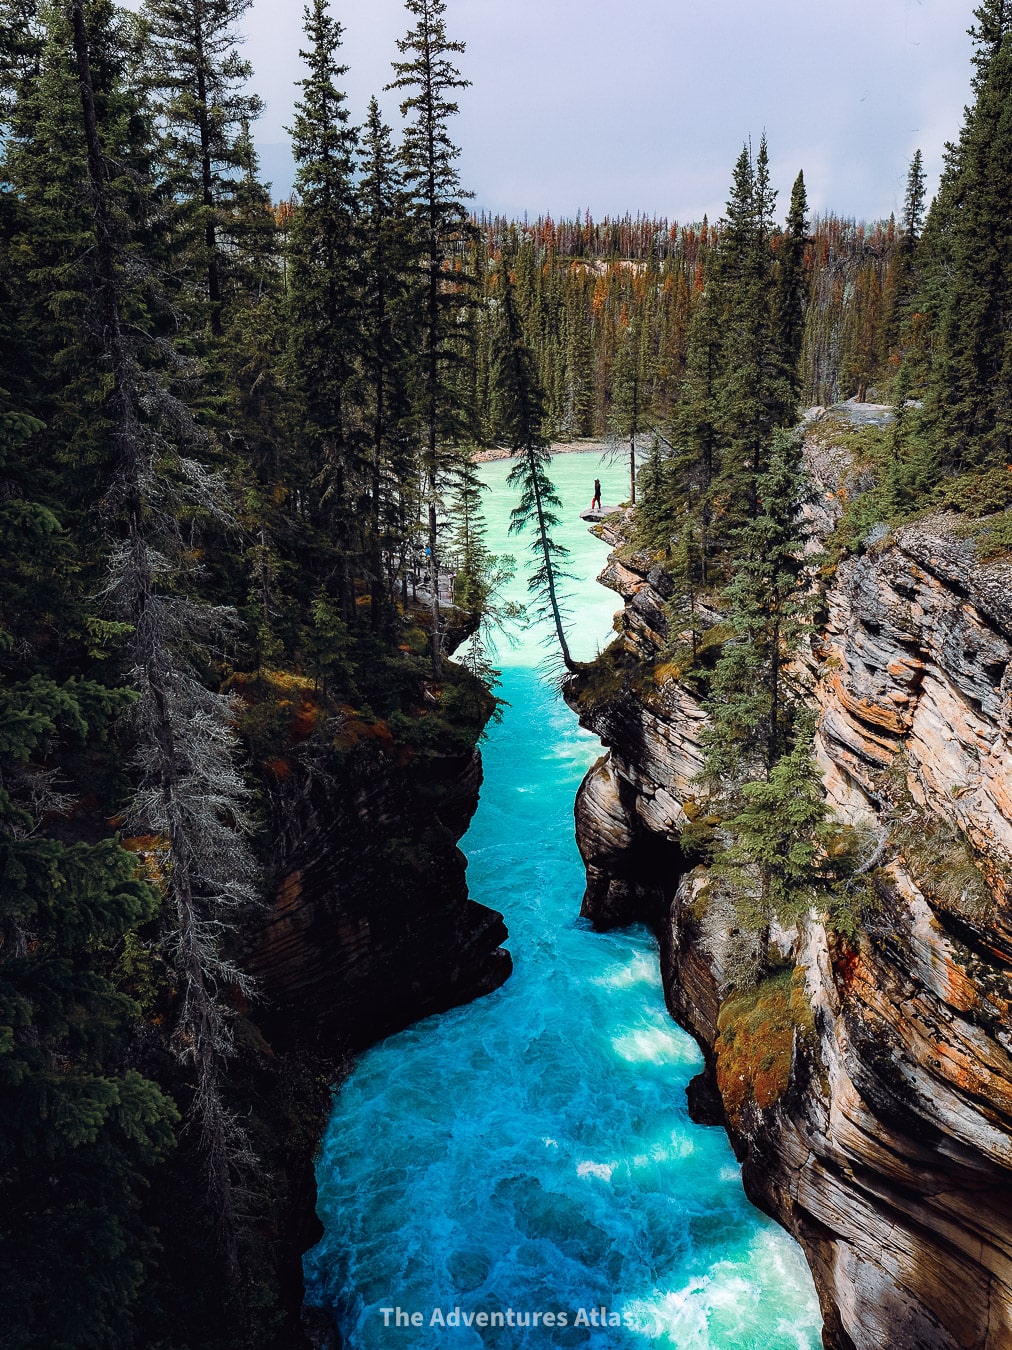 Athabasca Falls is one of the best places on the Icefields Parkway from Banff to Jasper